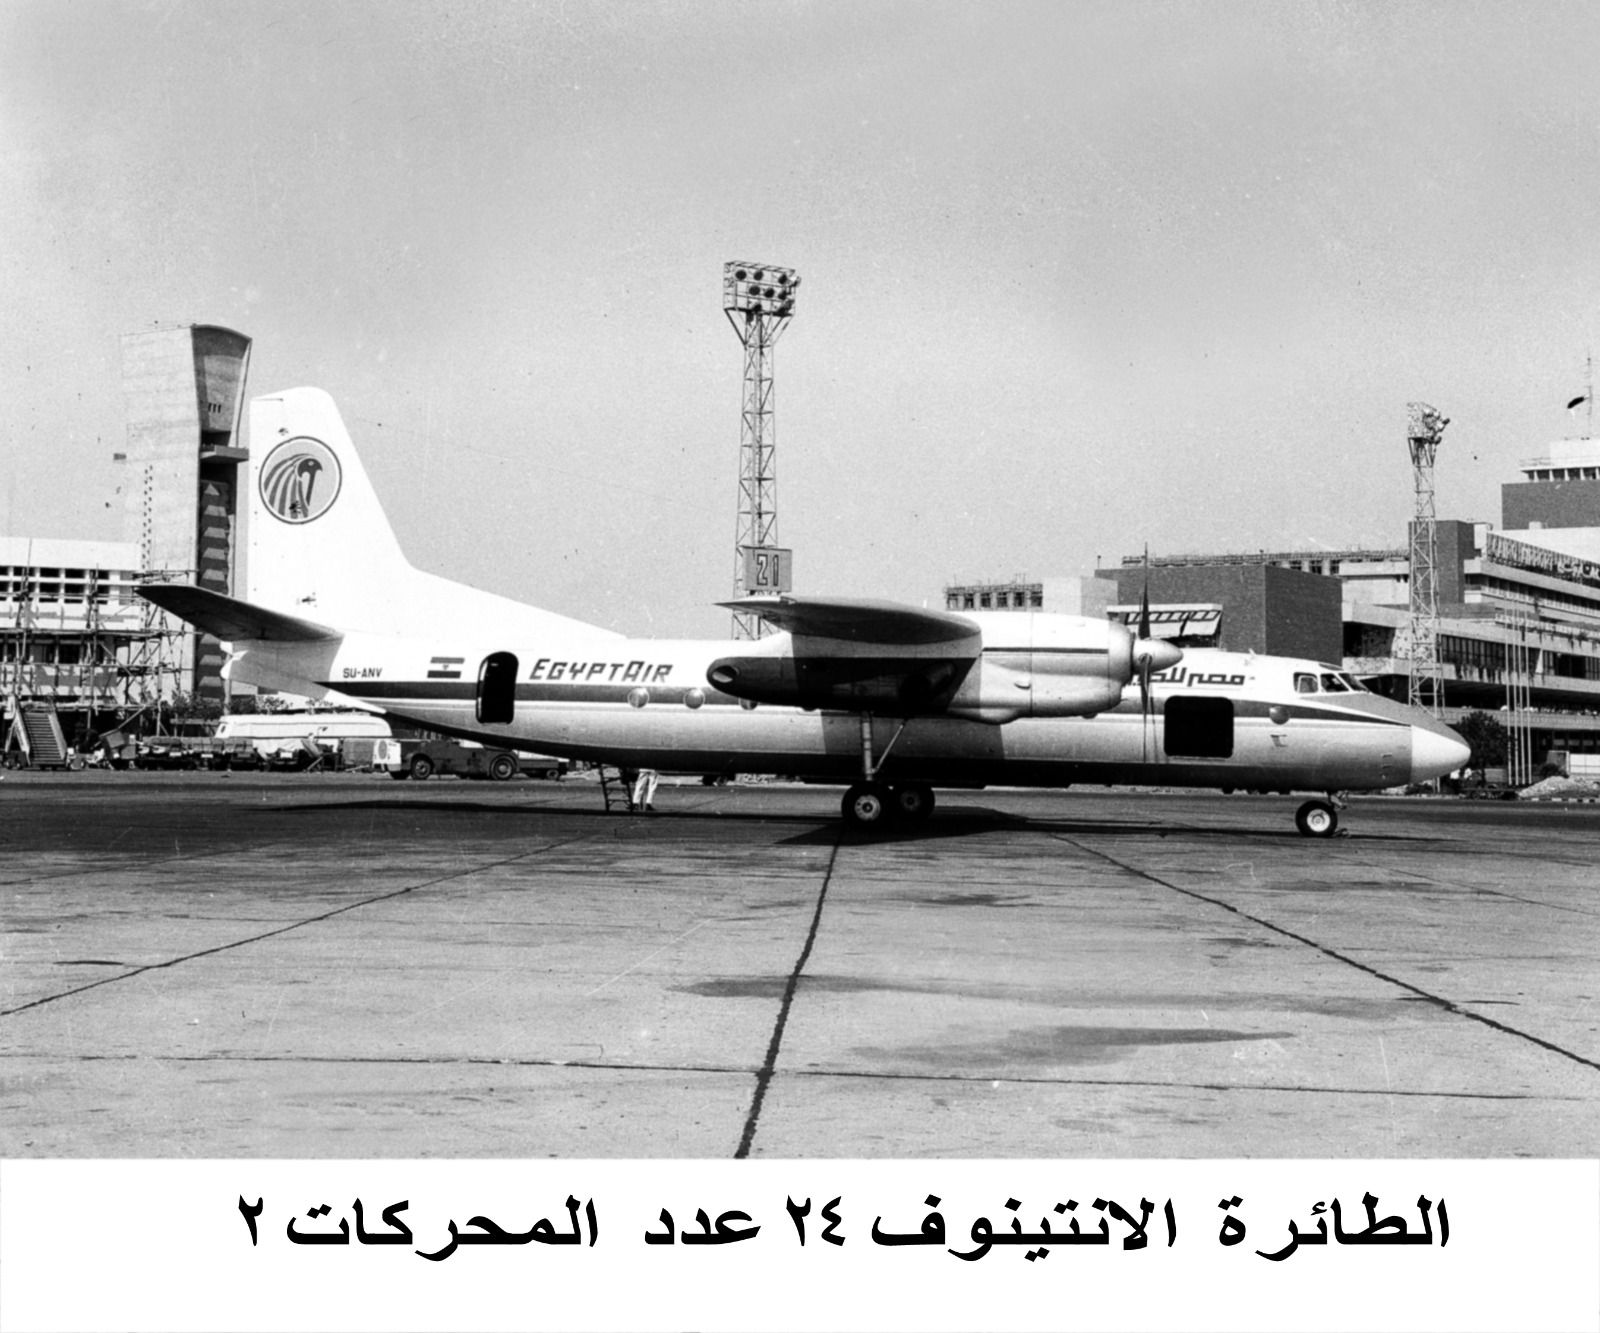 Misr Airlines